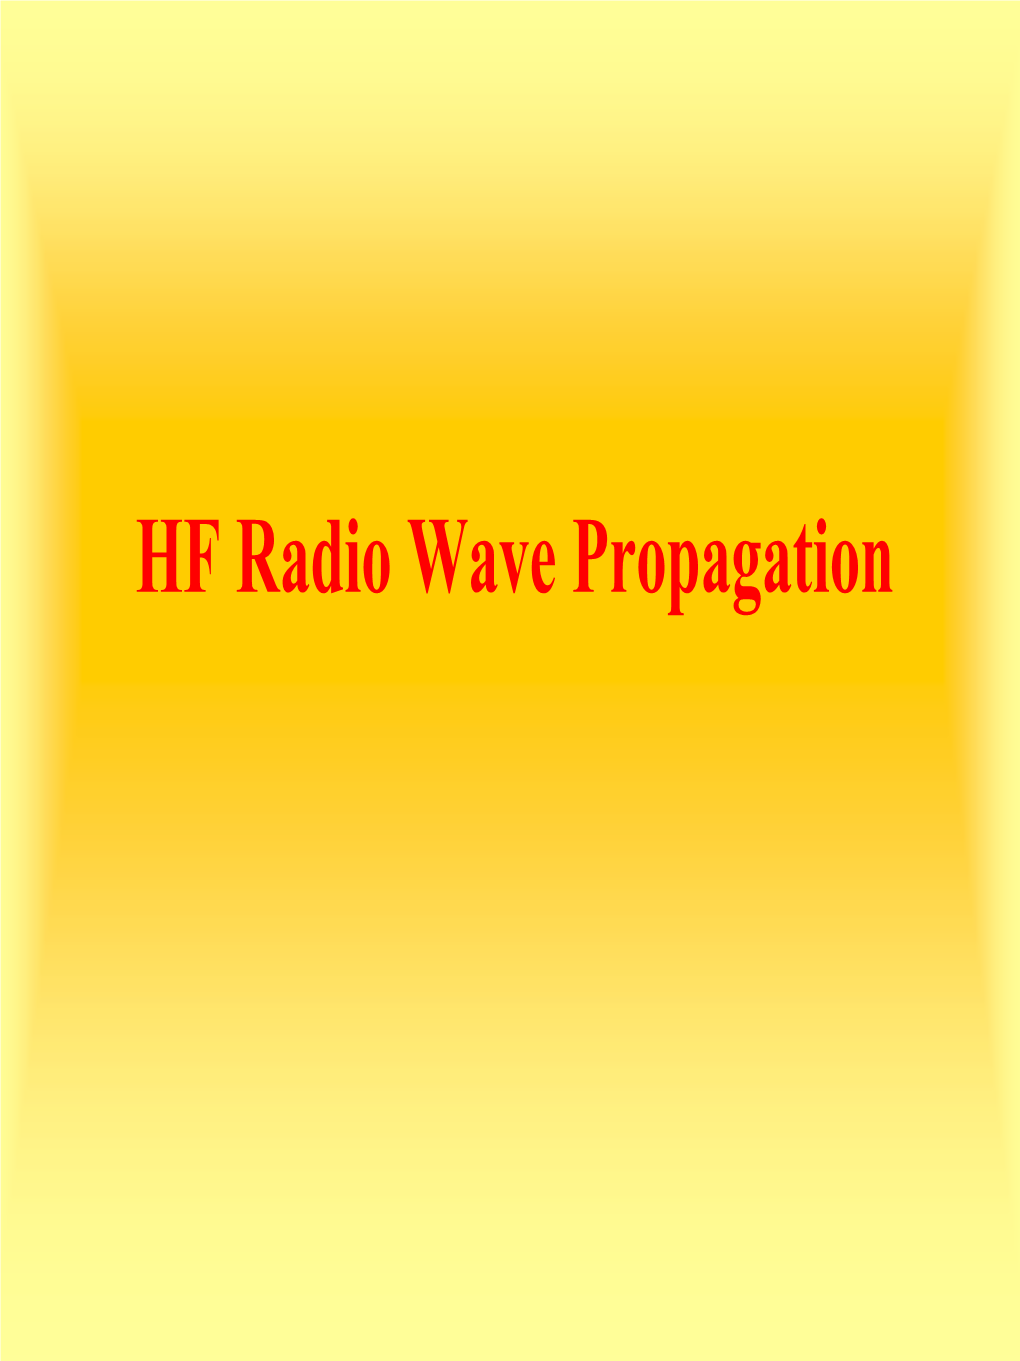 HF Radio Propagation – Propagation Is Possible Over Thousands of Miles